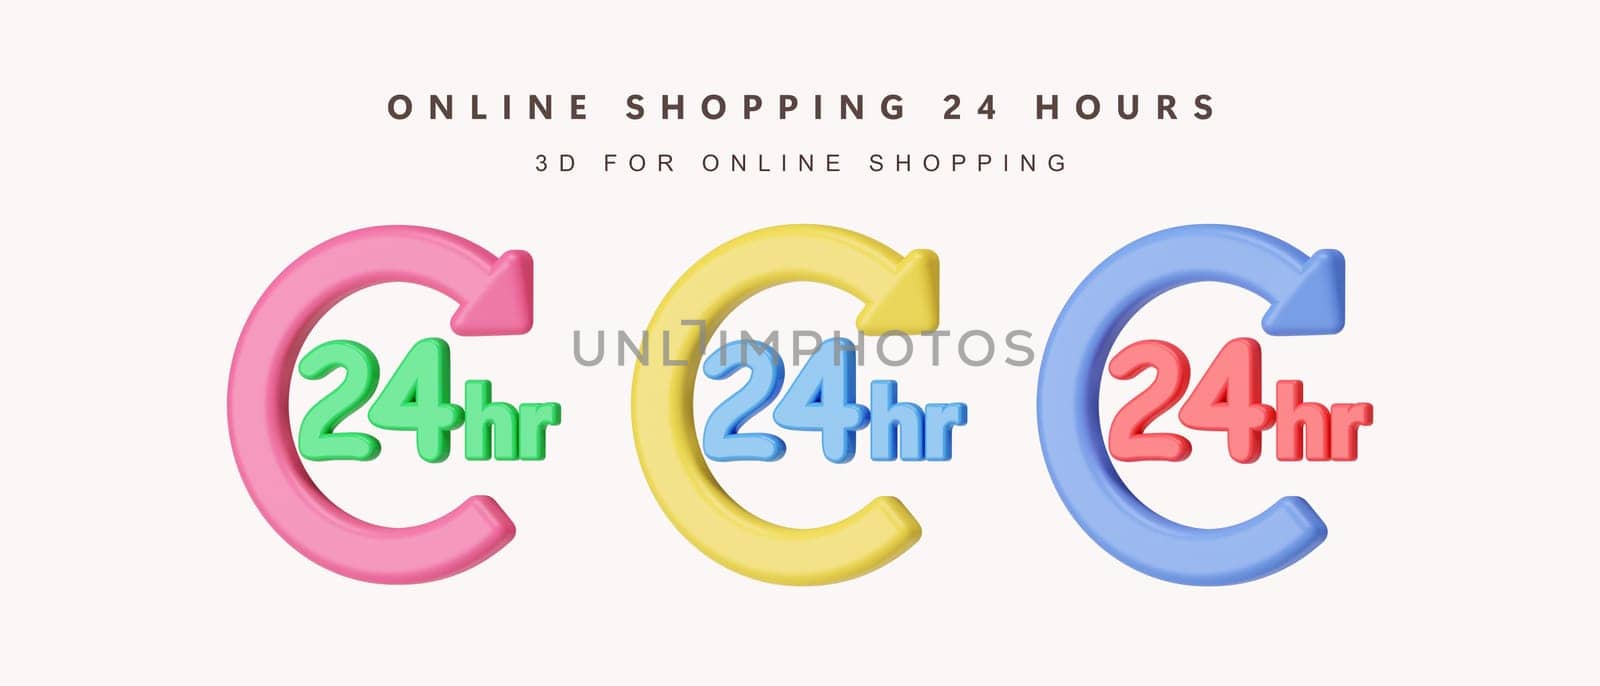 3d Set of online shopping 24 hours for shopping online concept. icon isolated on white background. 3d rendering illustration. Clipping path..